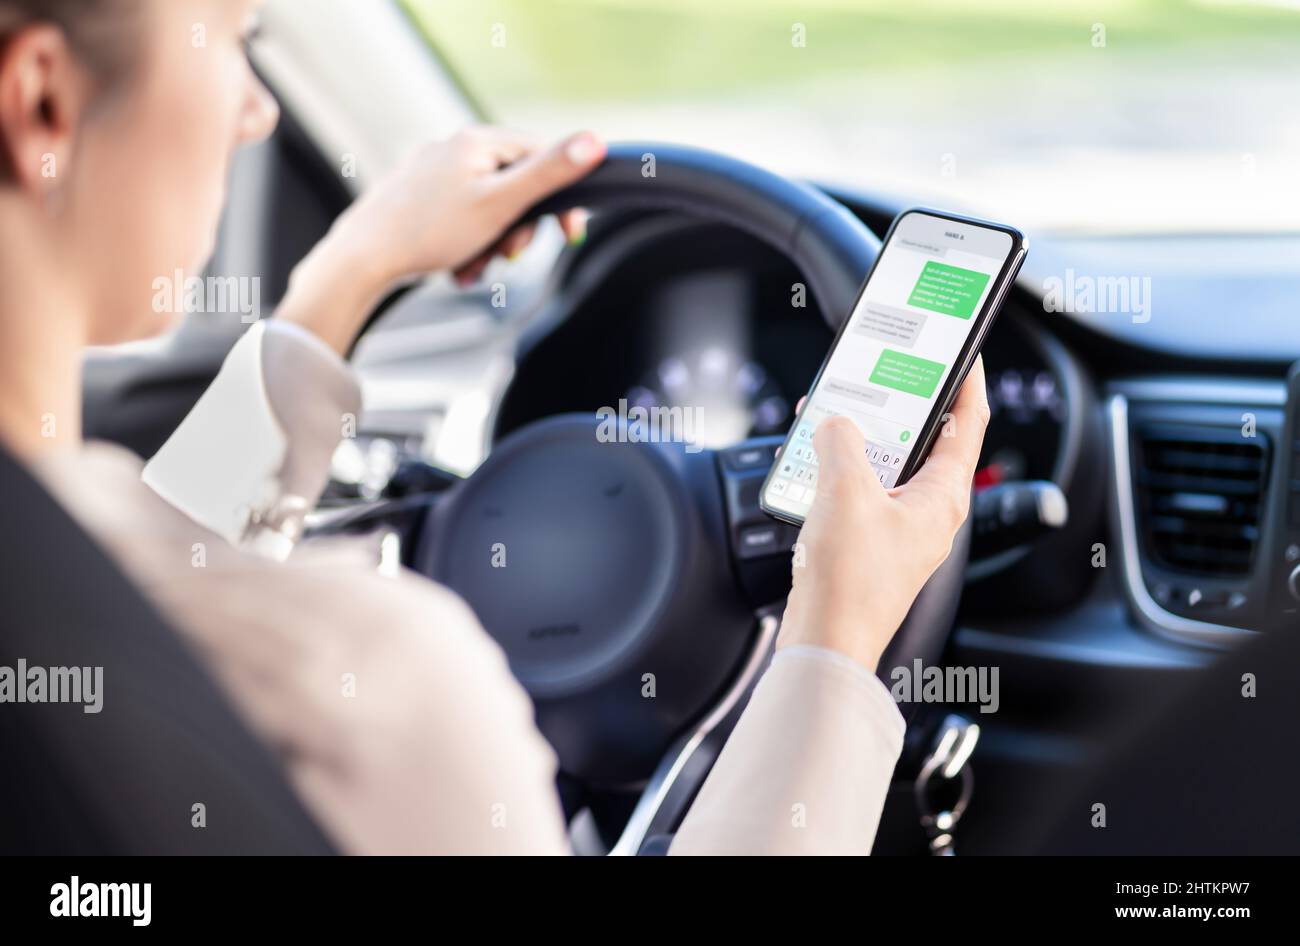 Using phone while driving car. Distracted driver texting while in vehicle. Irresponsible woman checking sms message with mobile cellphone in traffic. Stock Photo